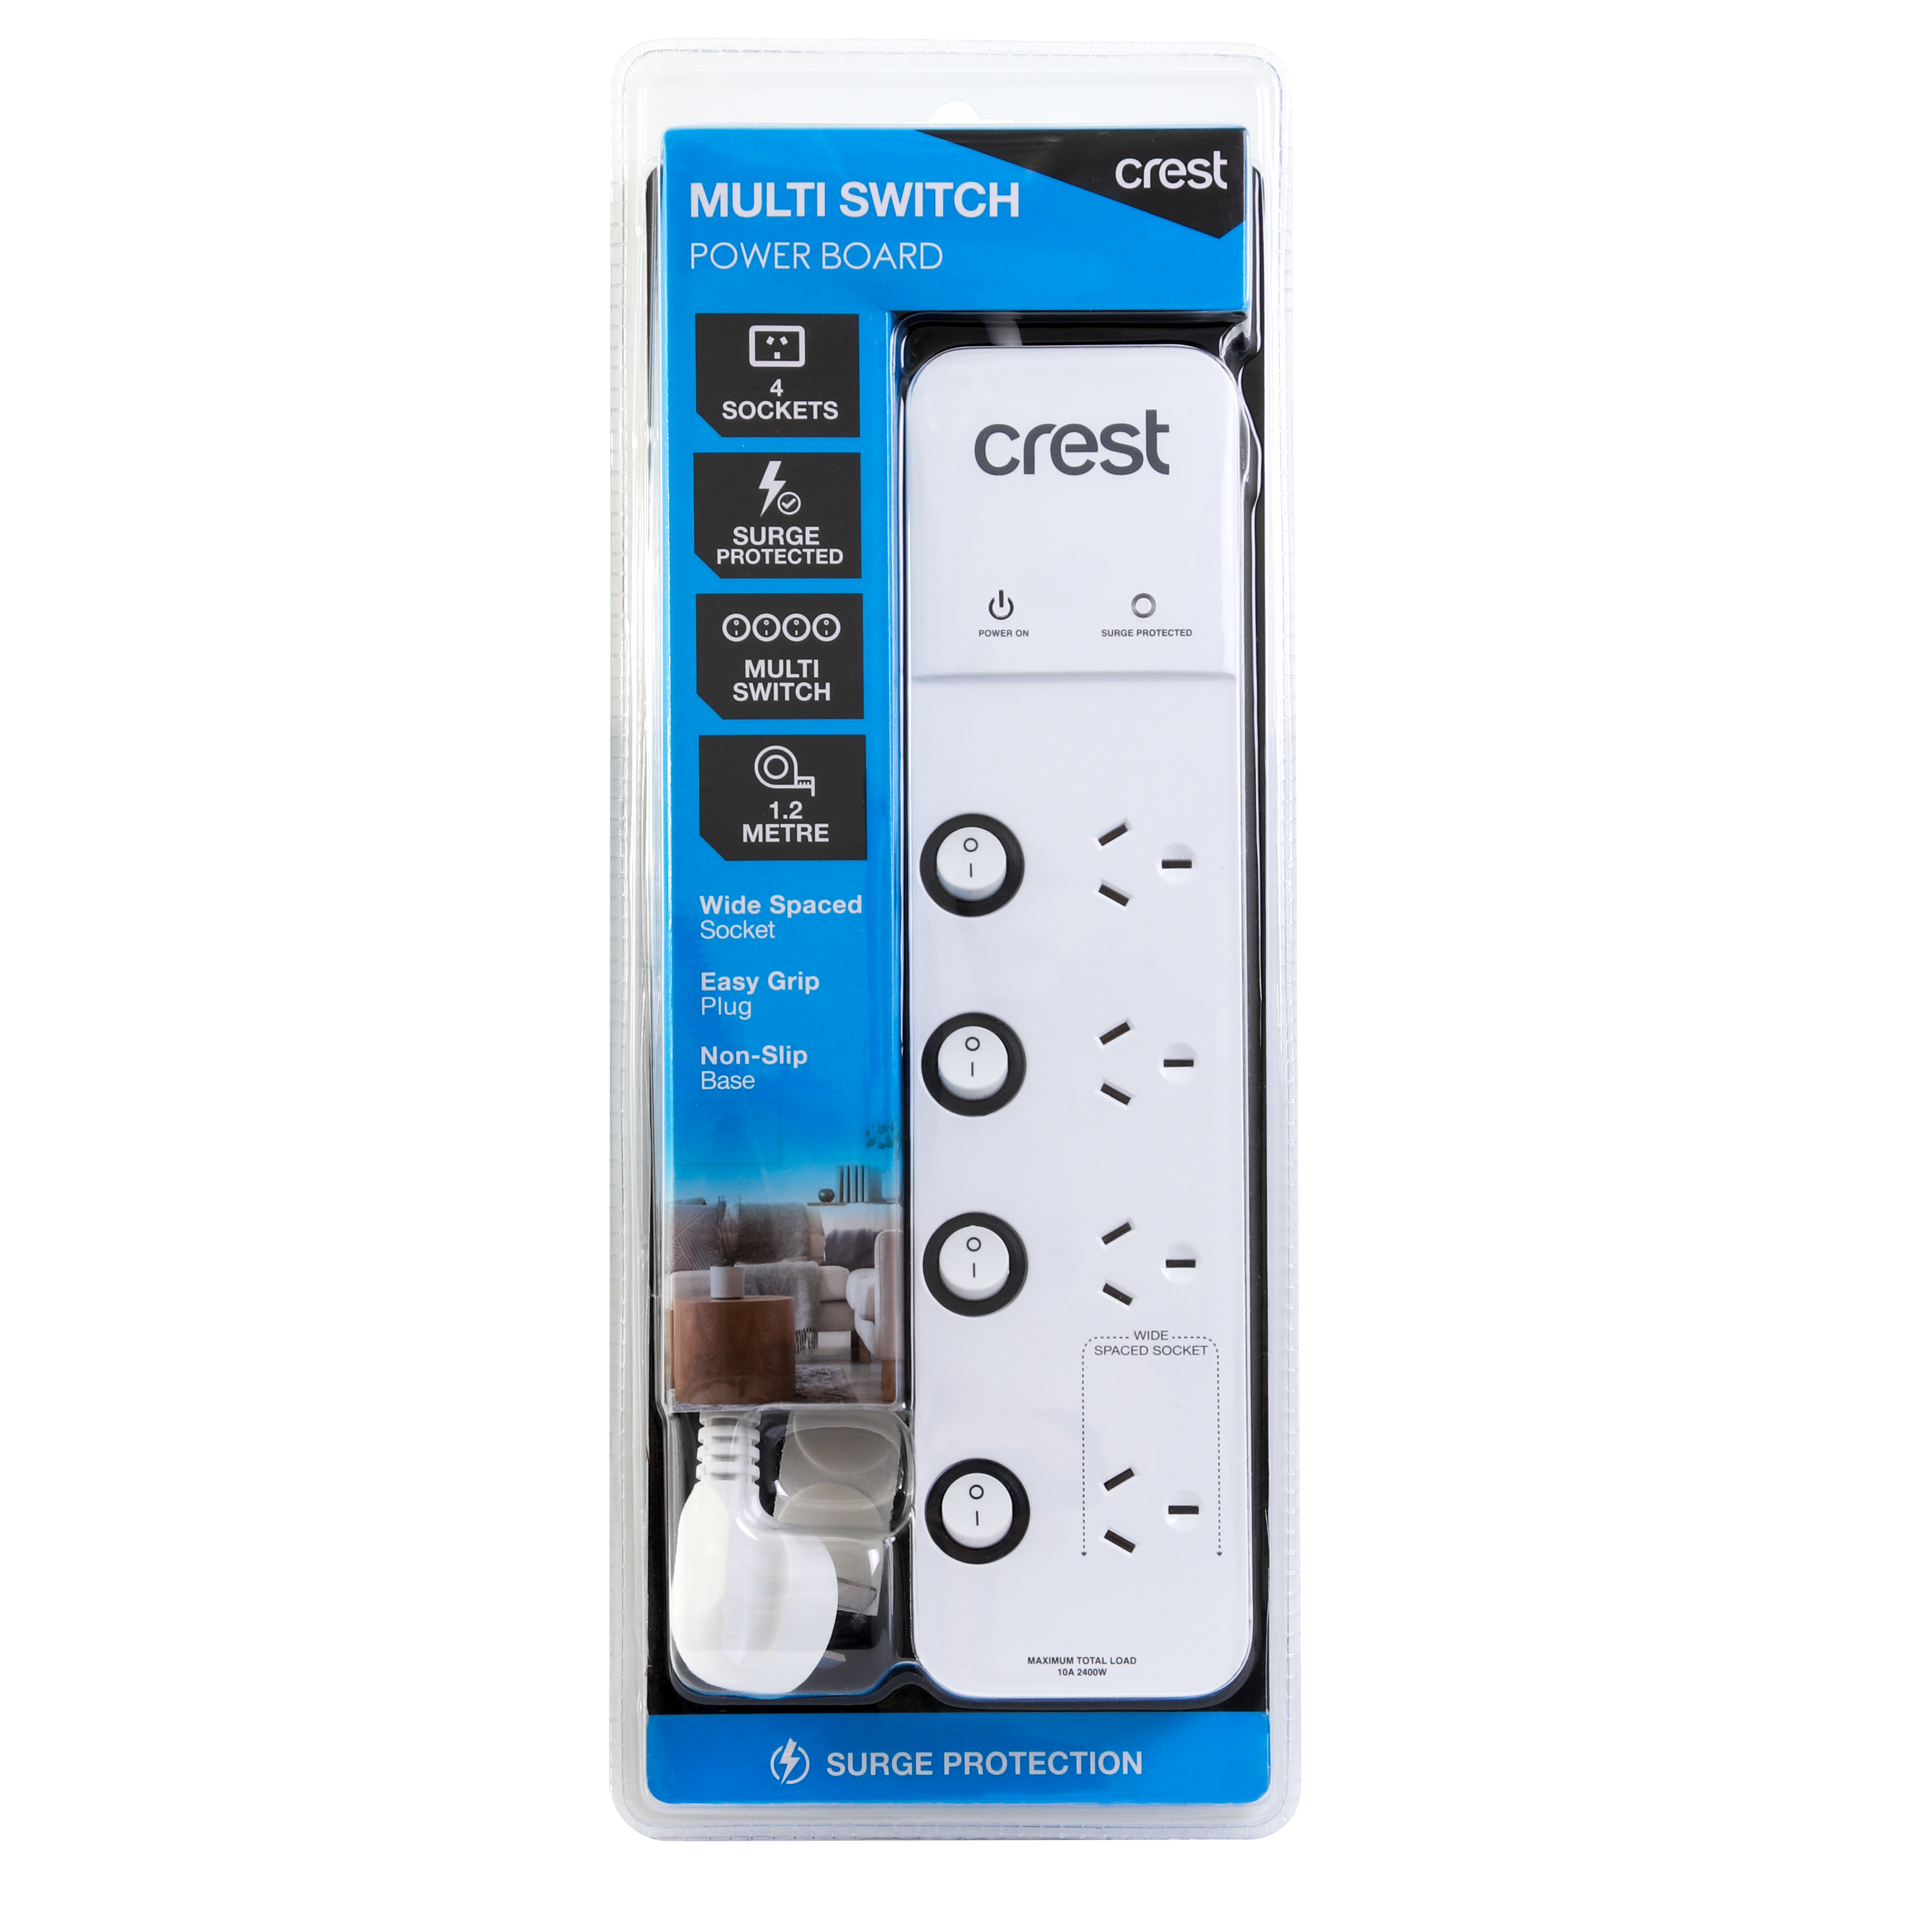 Power Board 4 Sockets with 4 Switches & Surge Protection